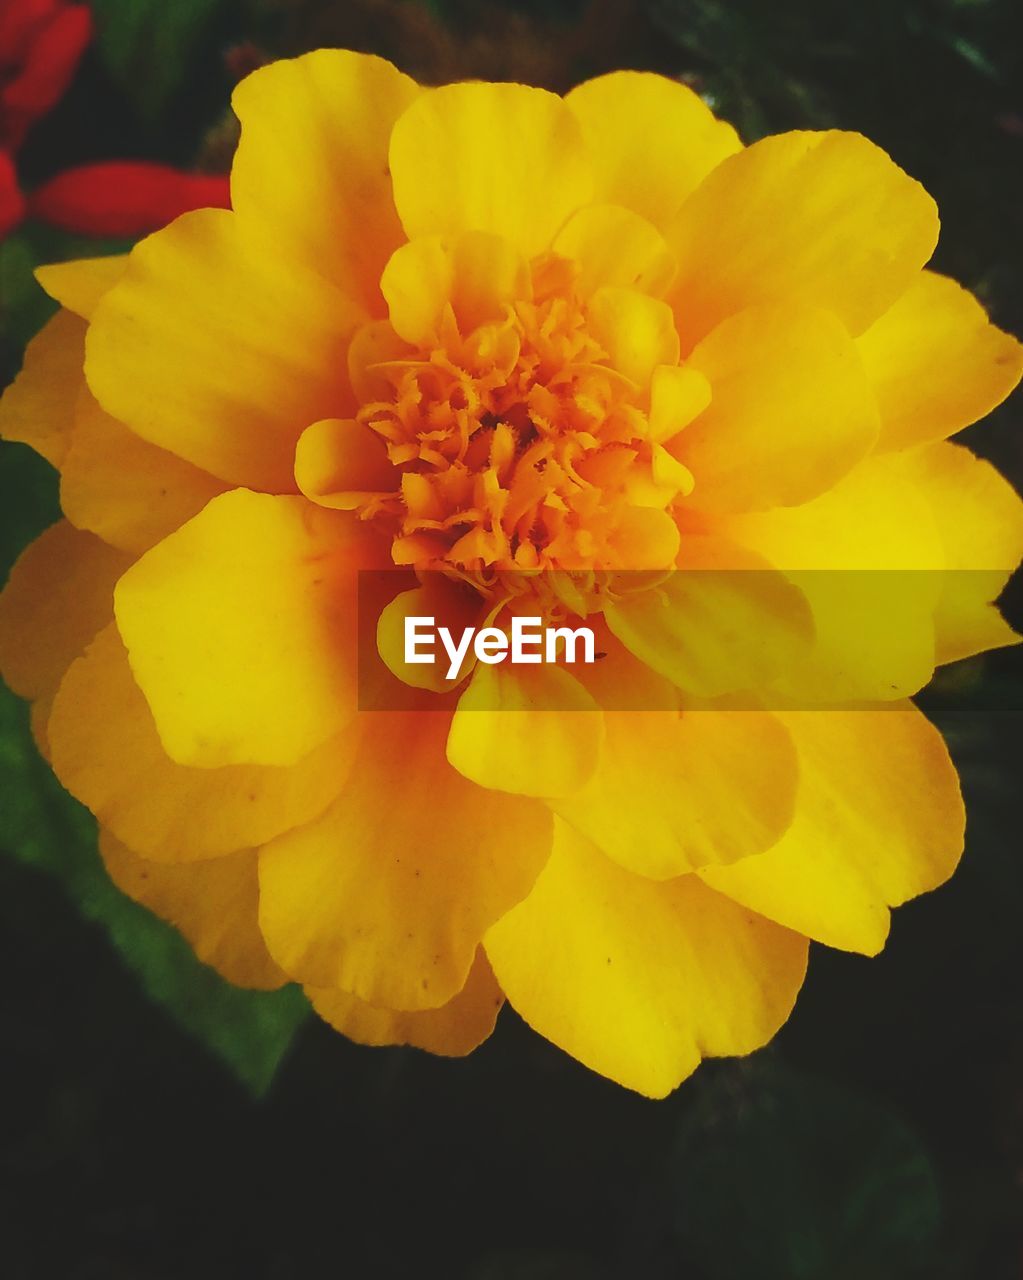 CLOSE-UP OF MARIGOLD FLOWER BLOOMING OUTDOORS